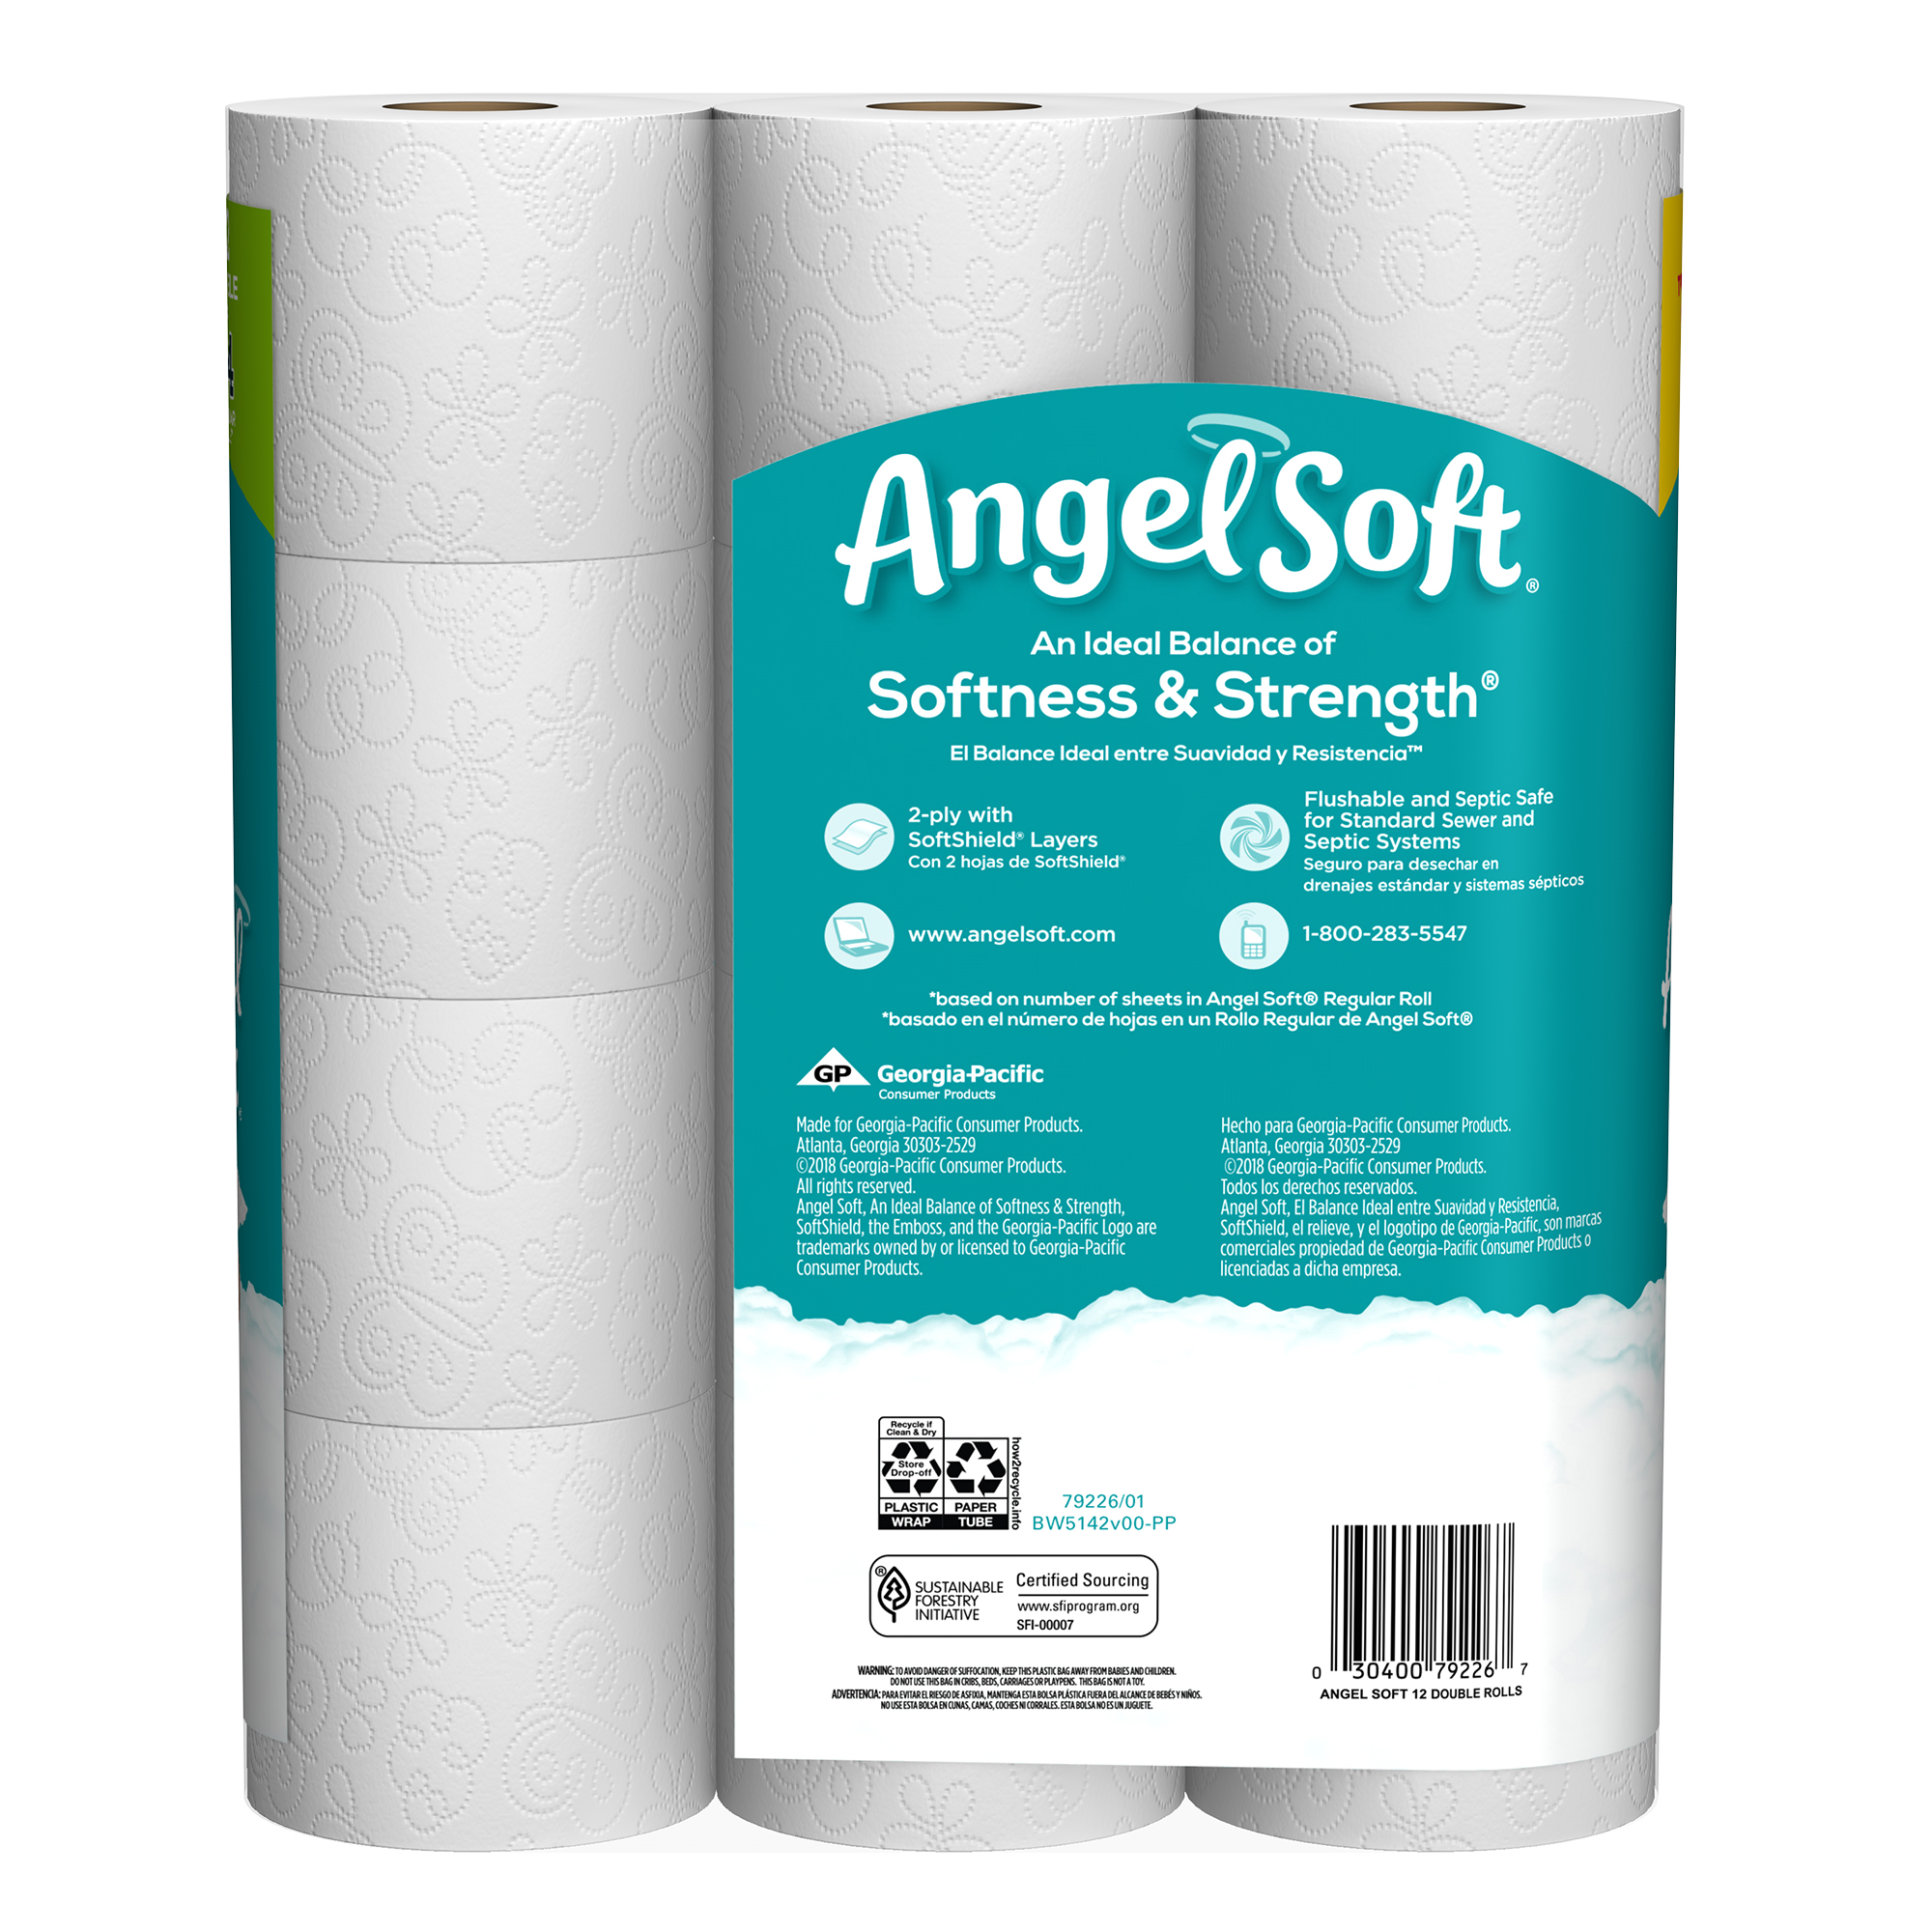 Angel Soft Toilet Paper, 12 Double Rolls - image 5 of 9